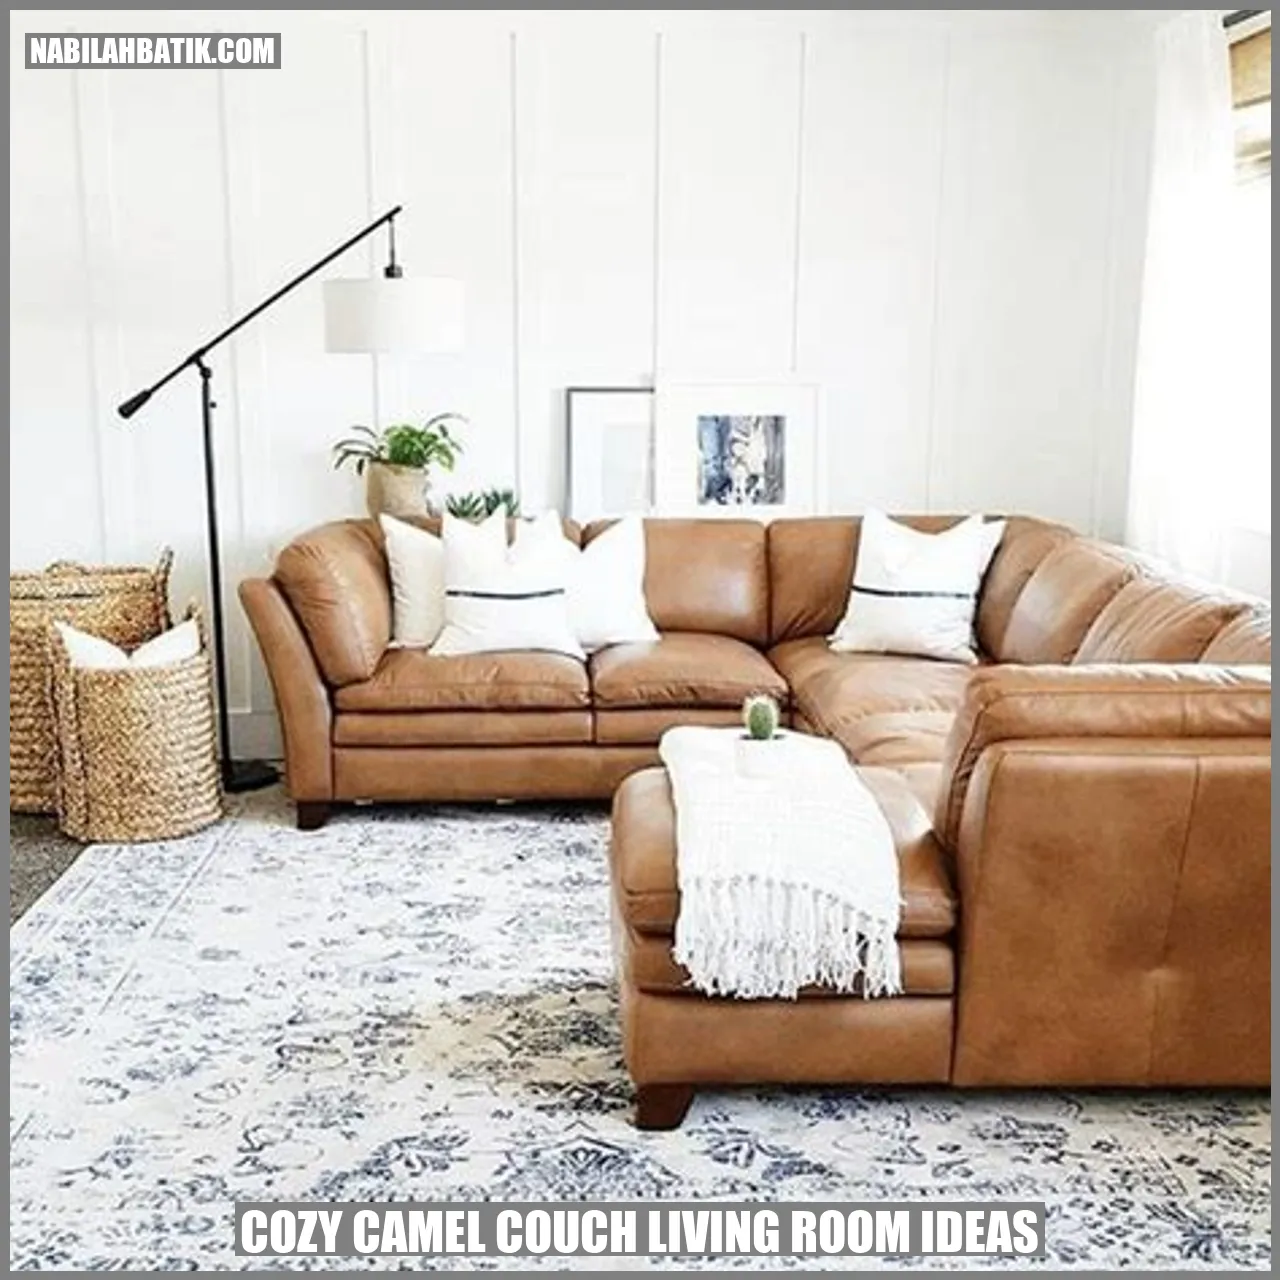 Cozy Camel Couch Living Room Ideas